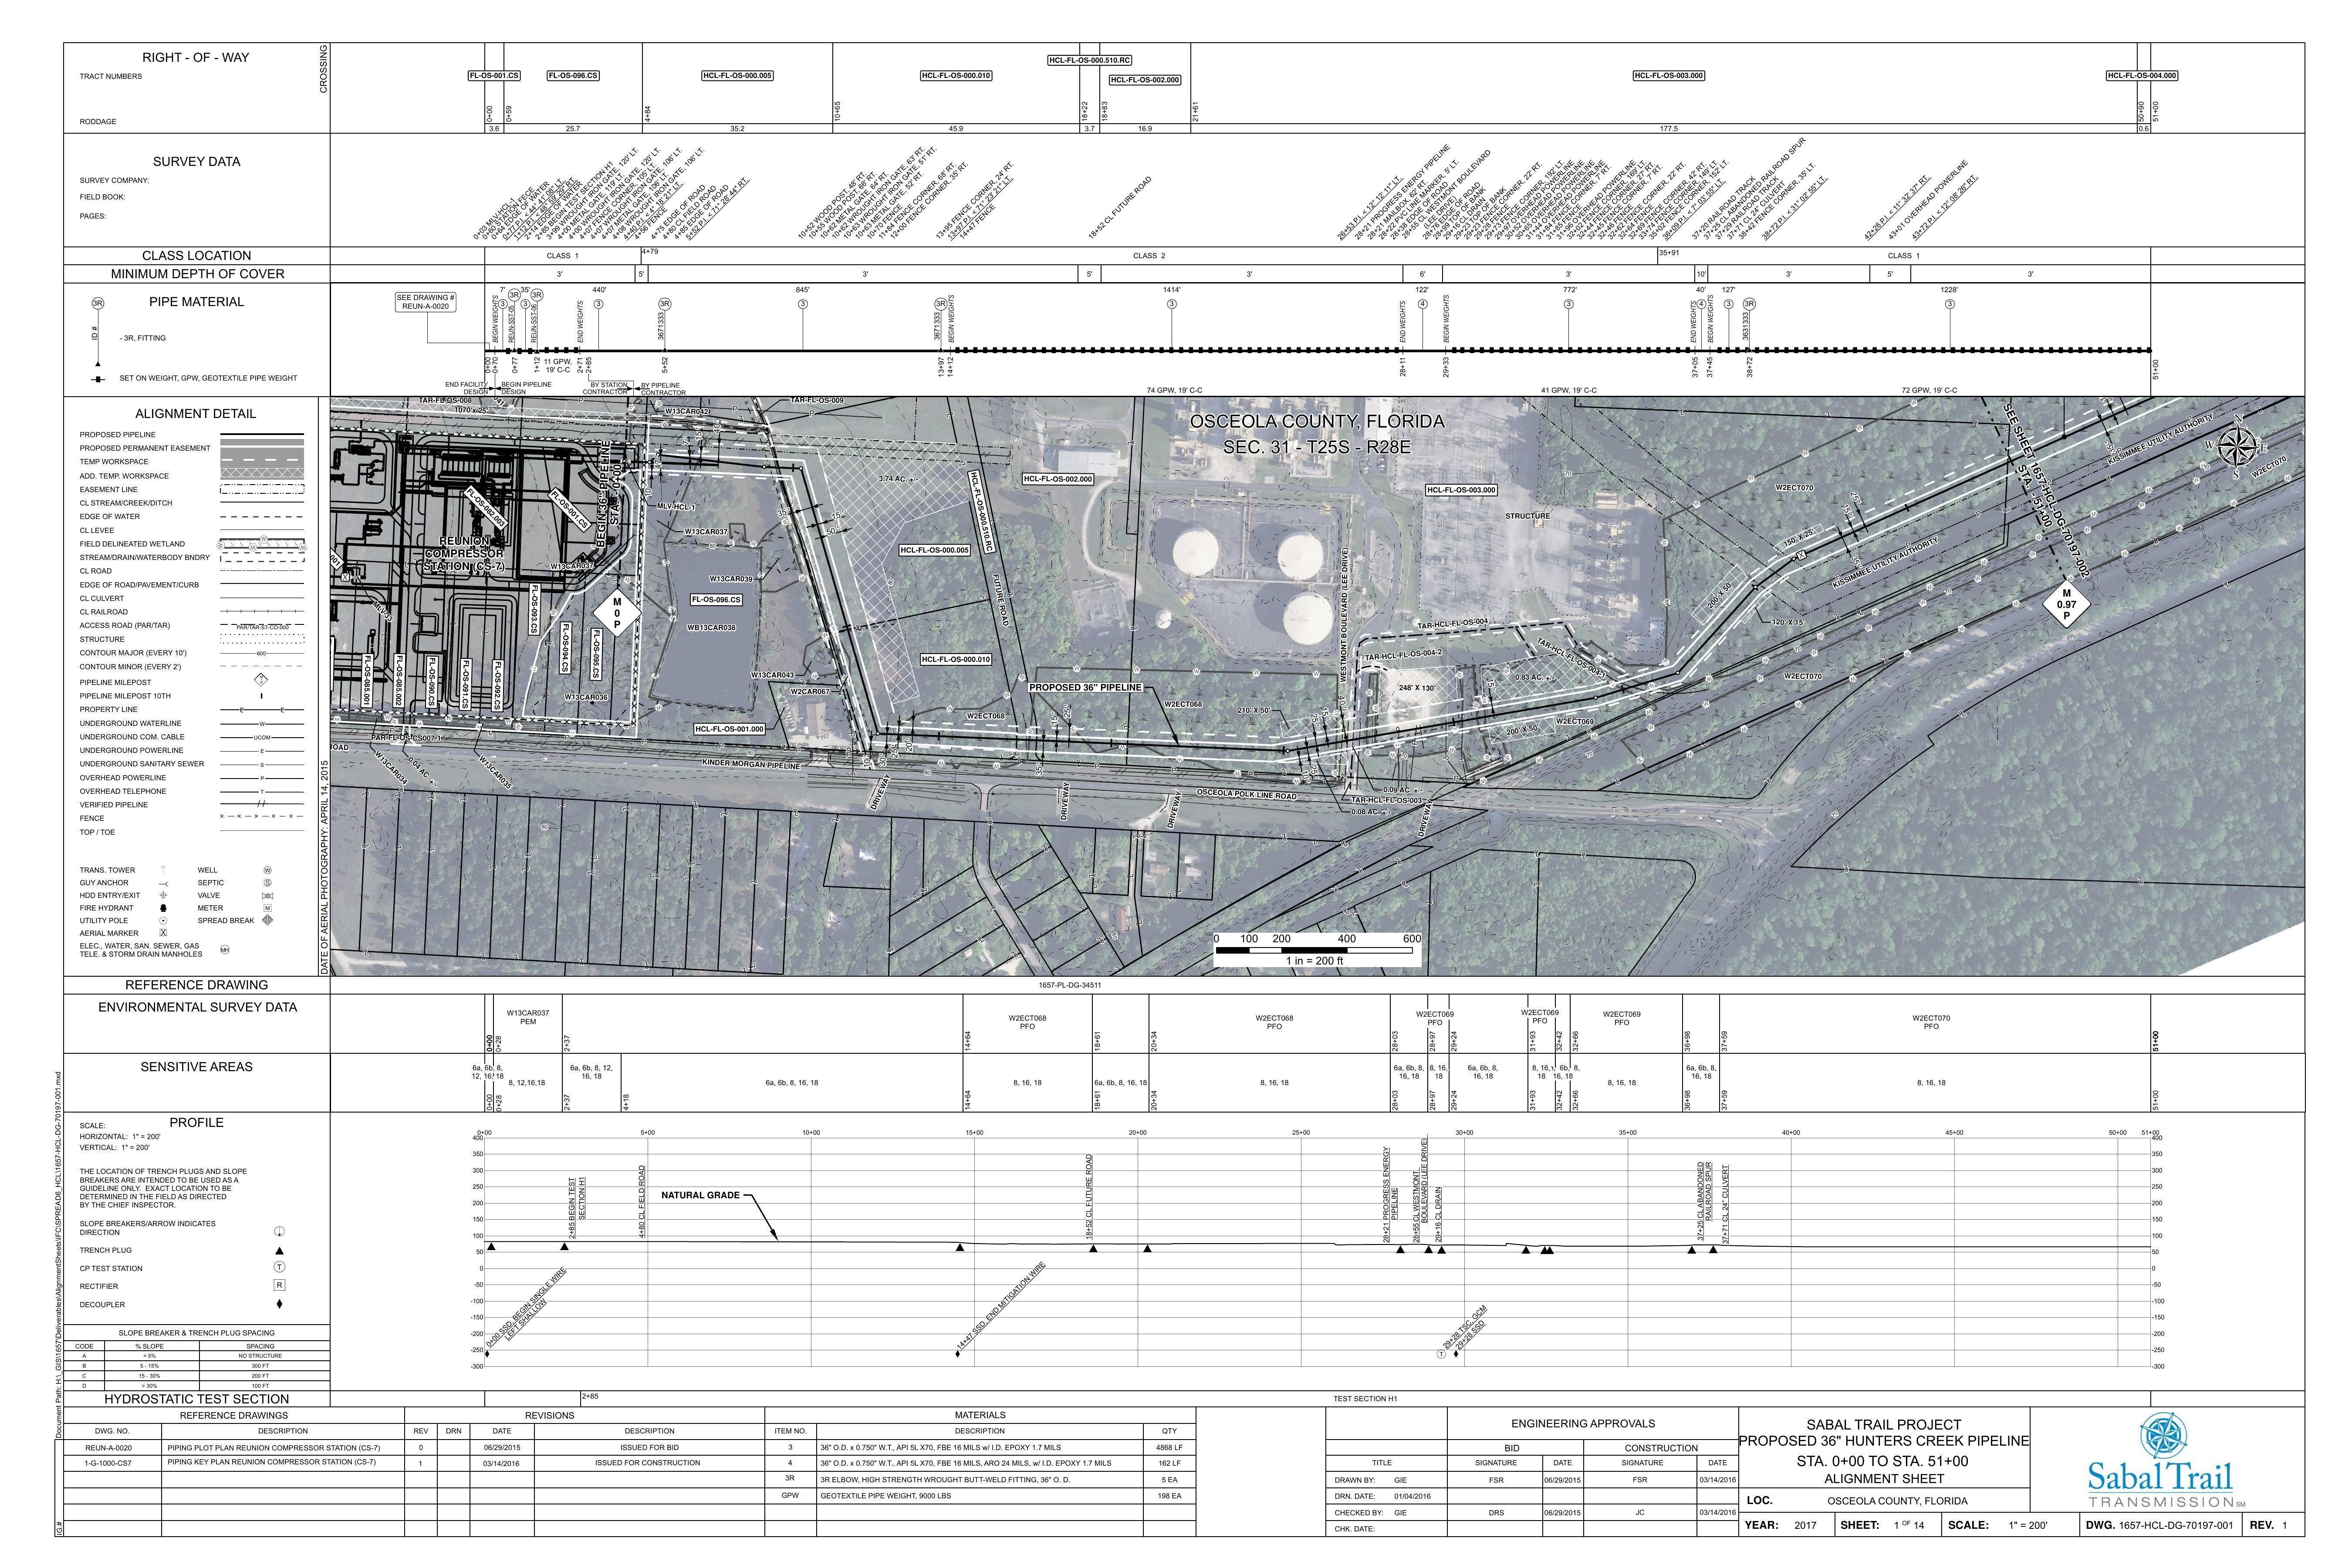 [1657-HCL-DG-70197-001, STA. 0+00 TO STA. 51+00, CL ABANDONED RAILROAD SPUR, Reunion Compressor Station, Central Florida Pipeline Corp., Osceola-Polk Line Road, PROPOSED 36-inch HUNTERS CREEK PIPELINE, OSCEOLA COUNTY, FLORIDA, 28.260146, -81.548836]